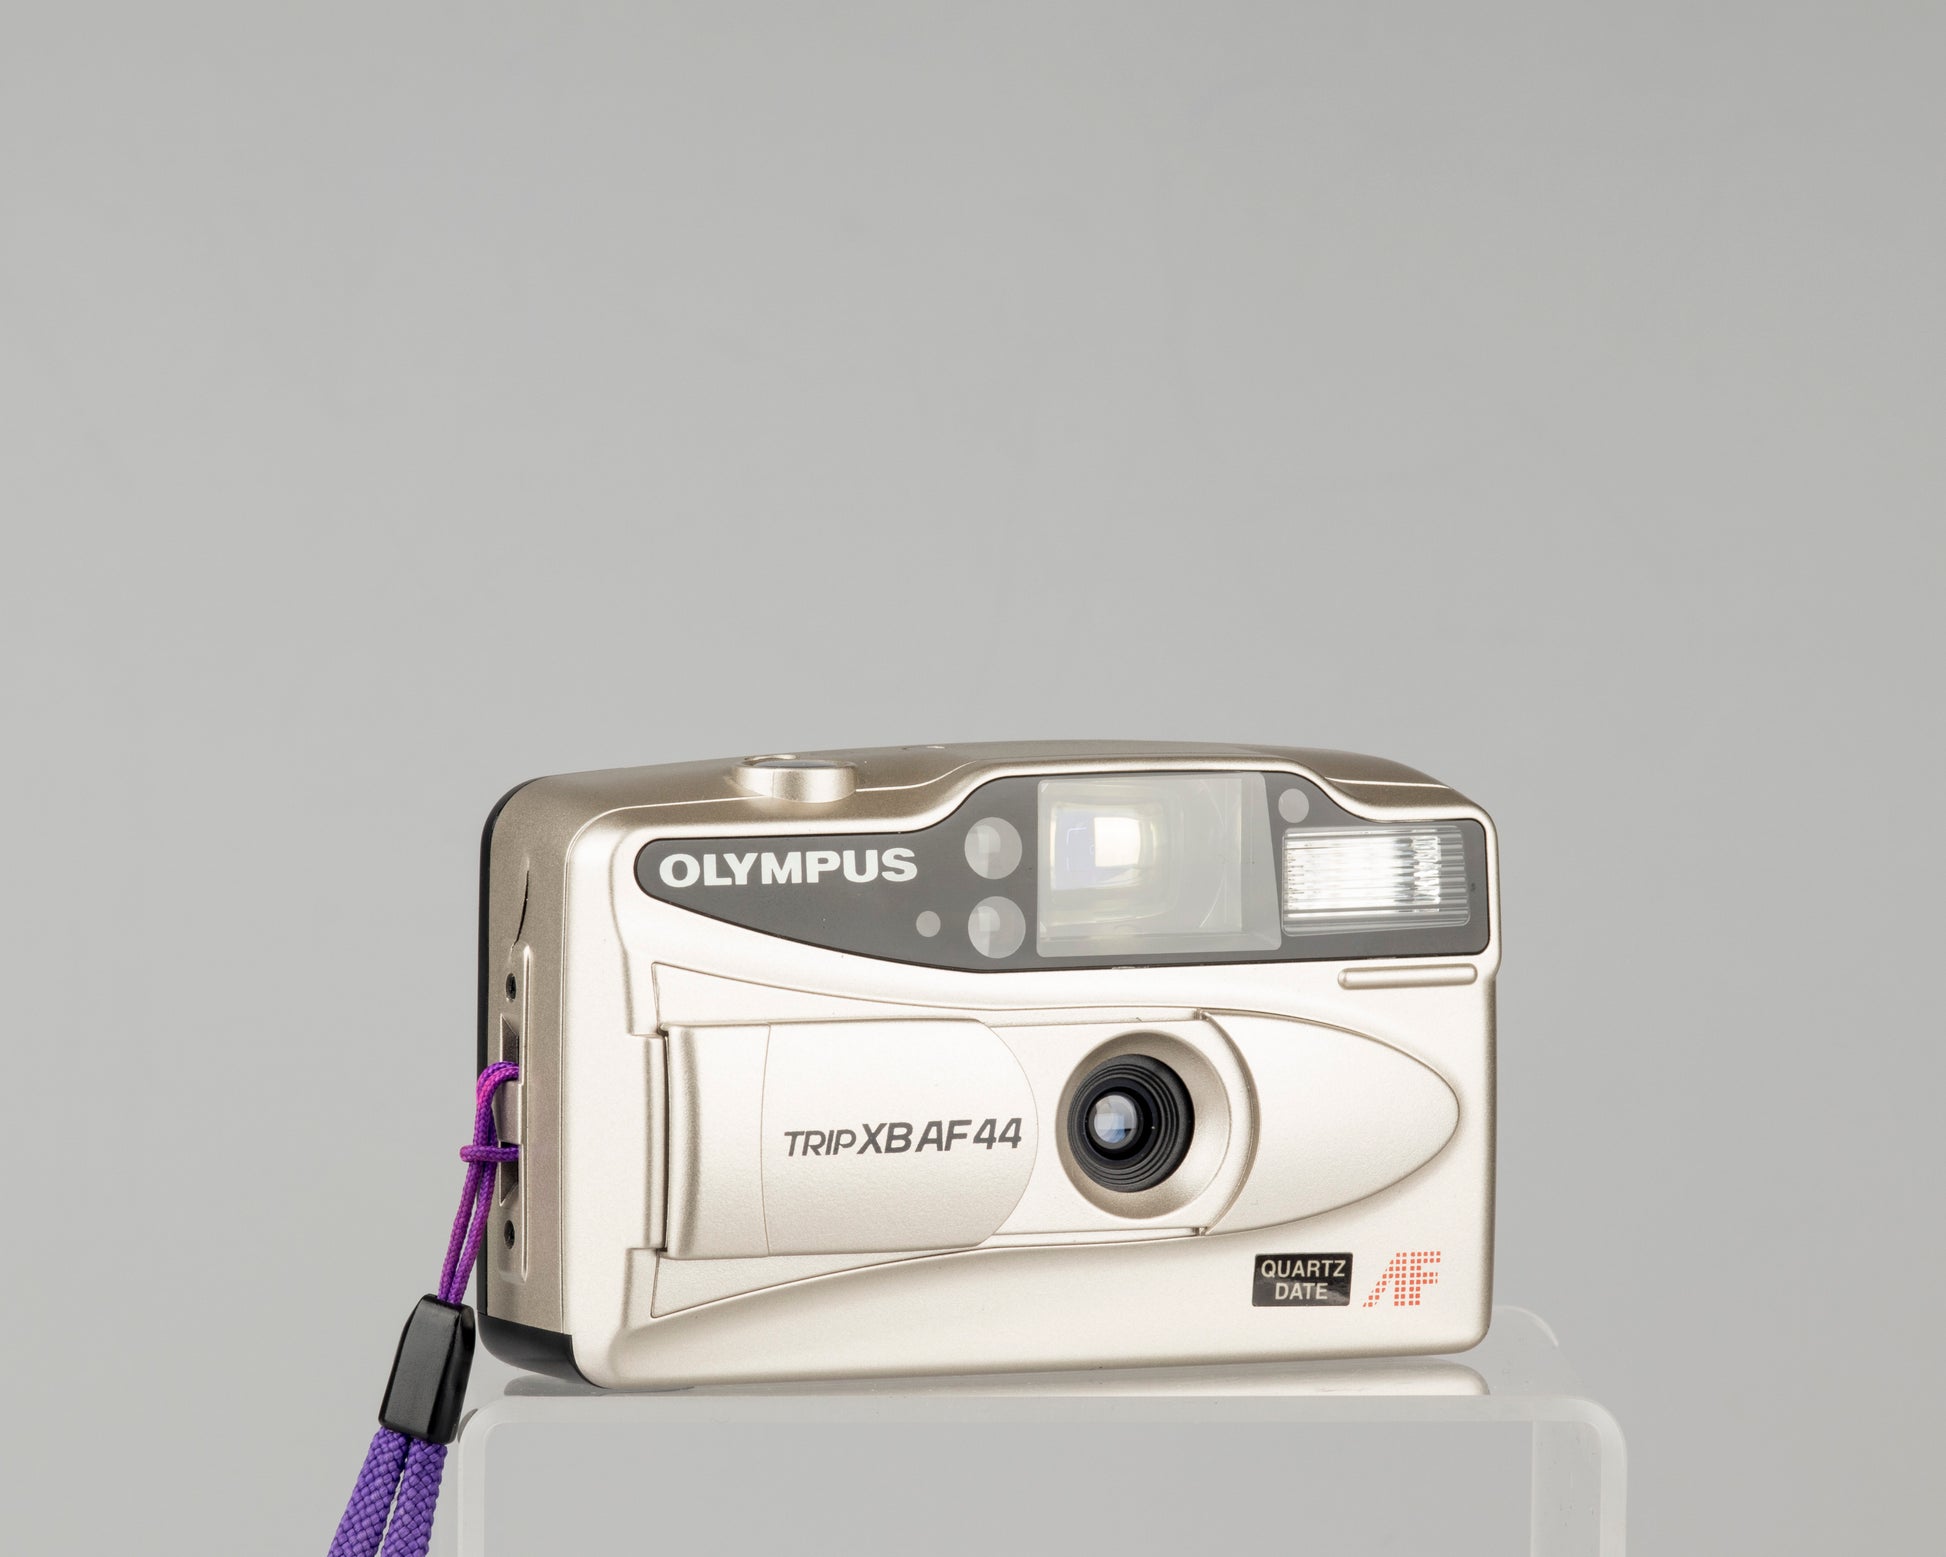 The Olympus Trip XB AF44 is a compact 35mm film camera featuring a 27mm wide-angle lens